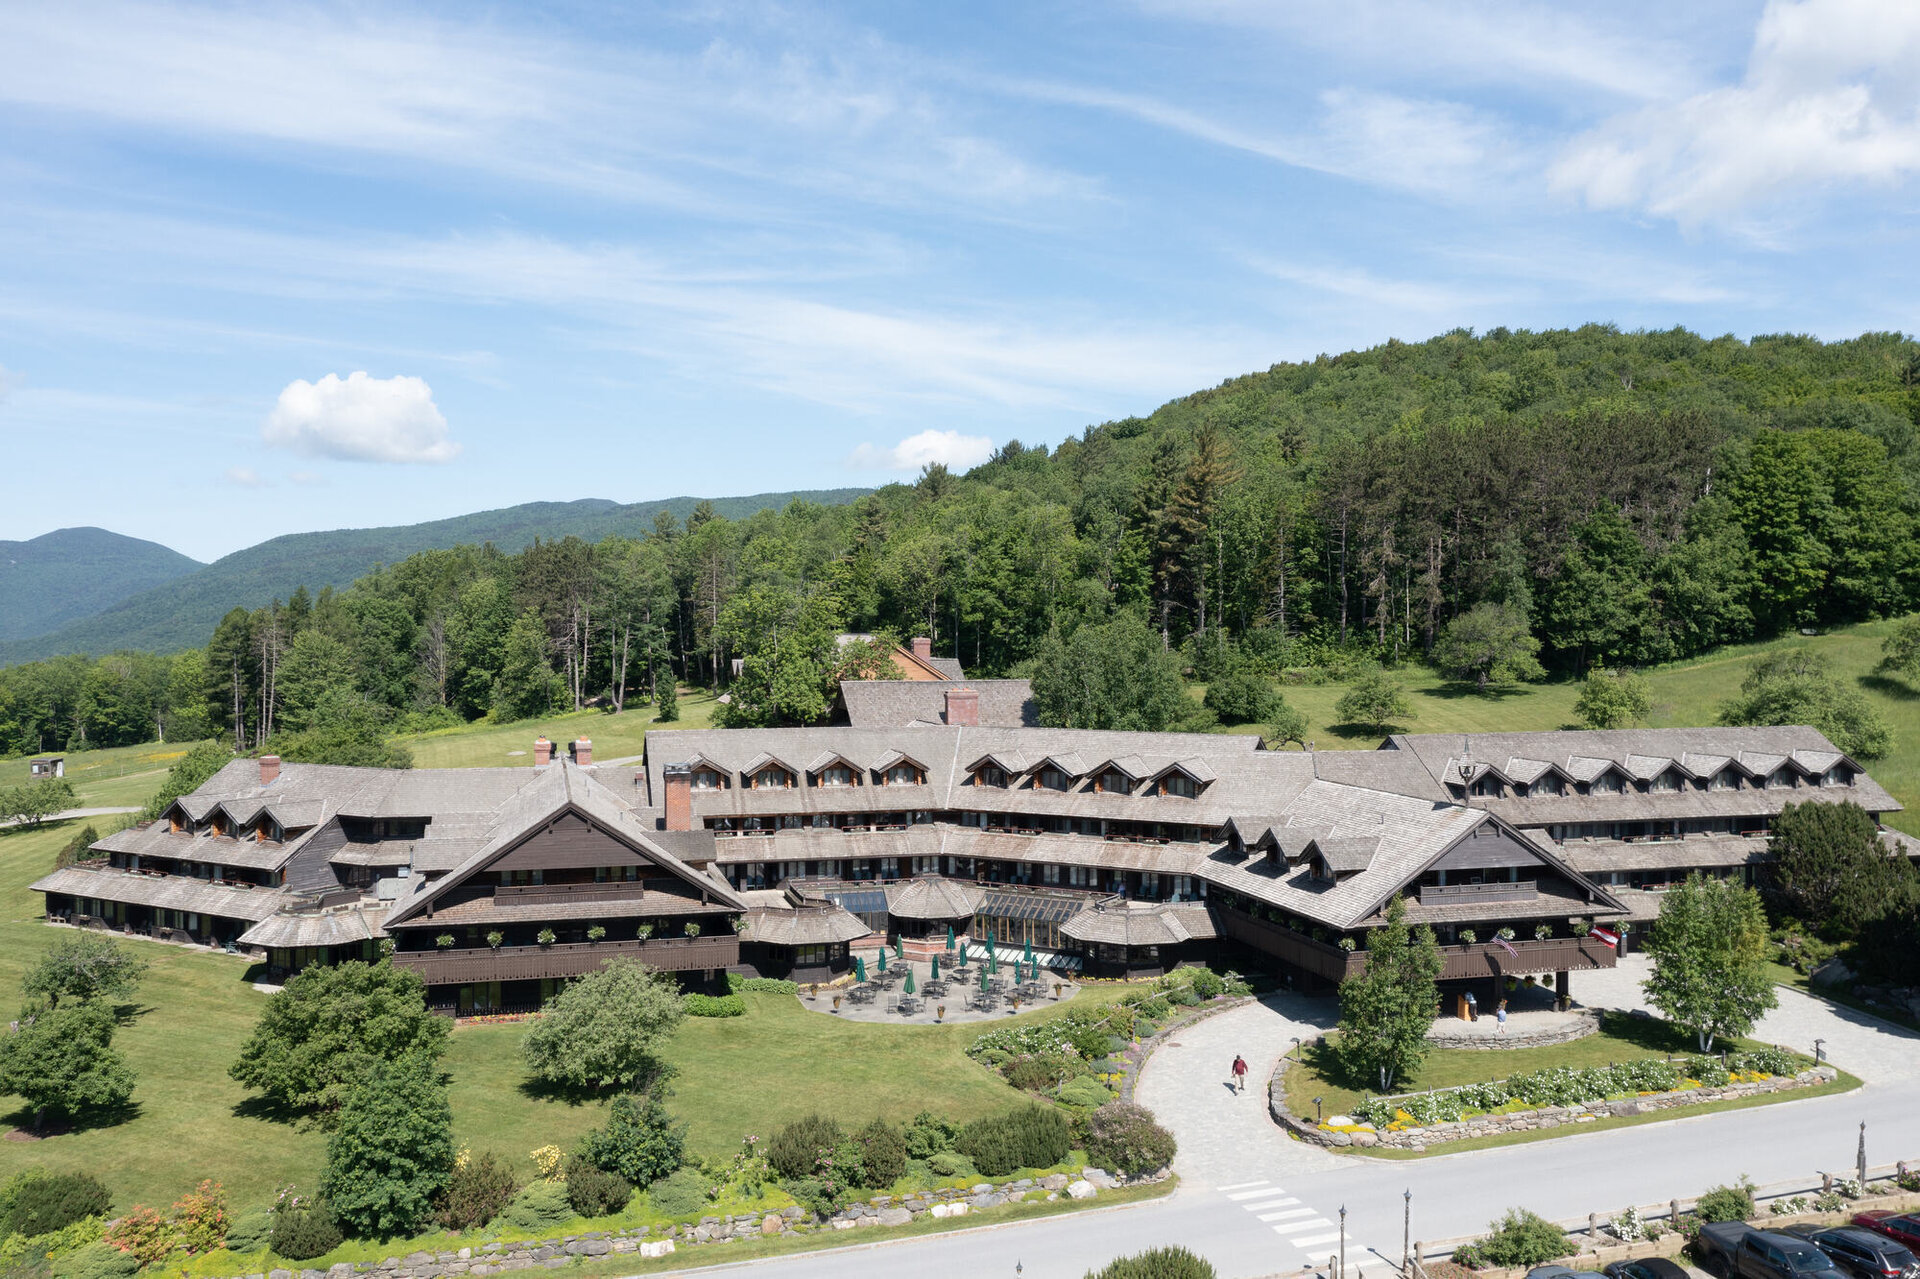 Exterior of Trapp Family Lodge